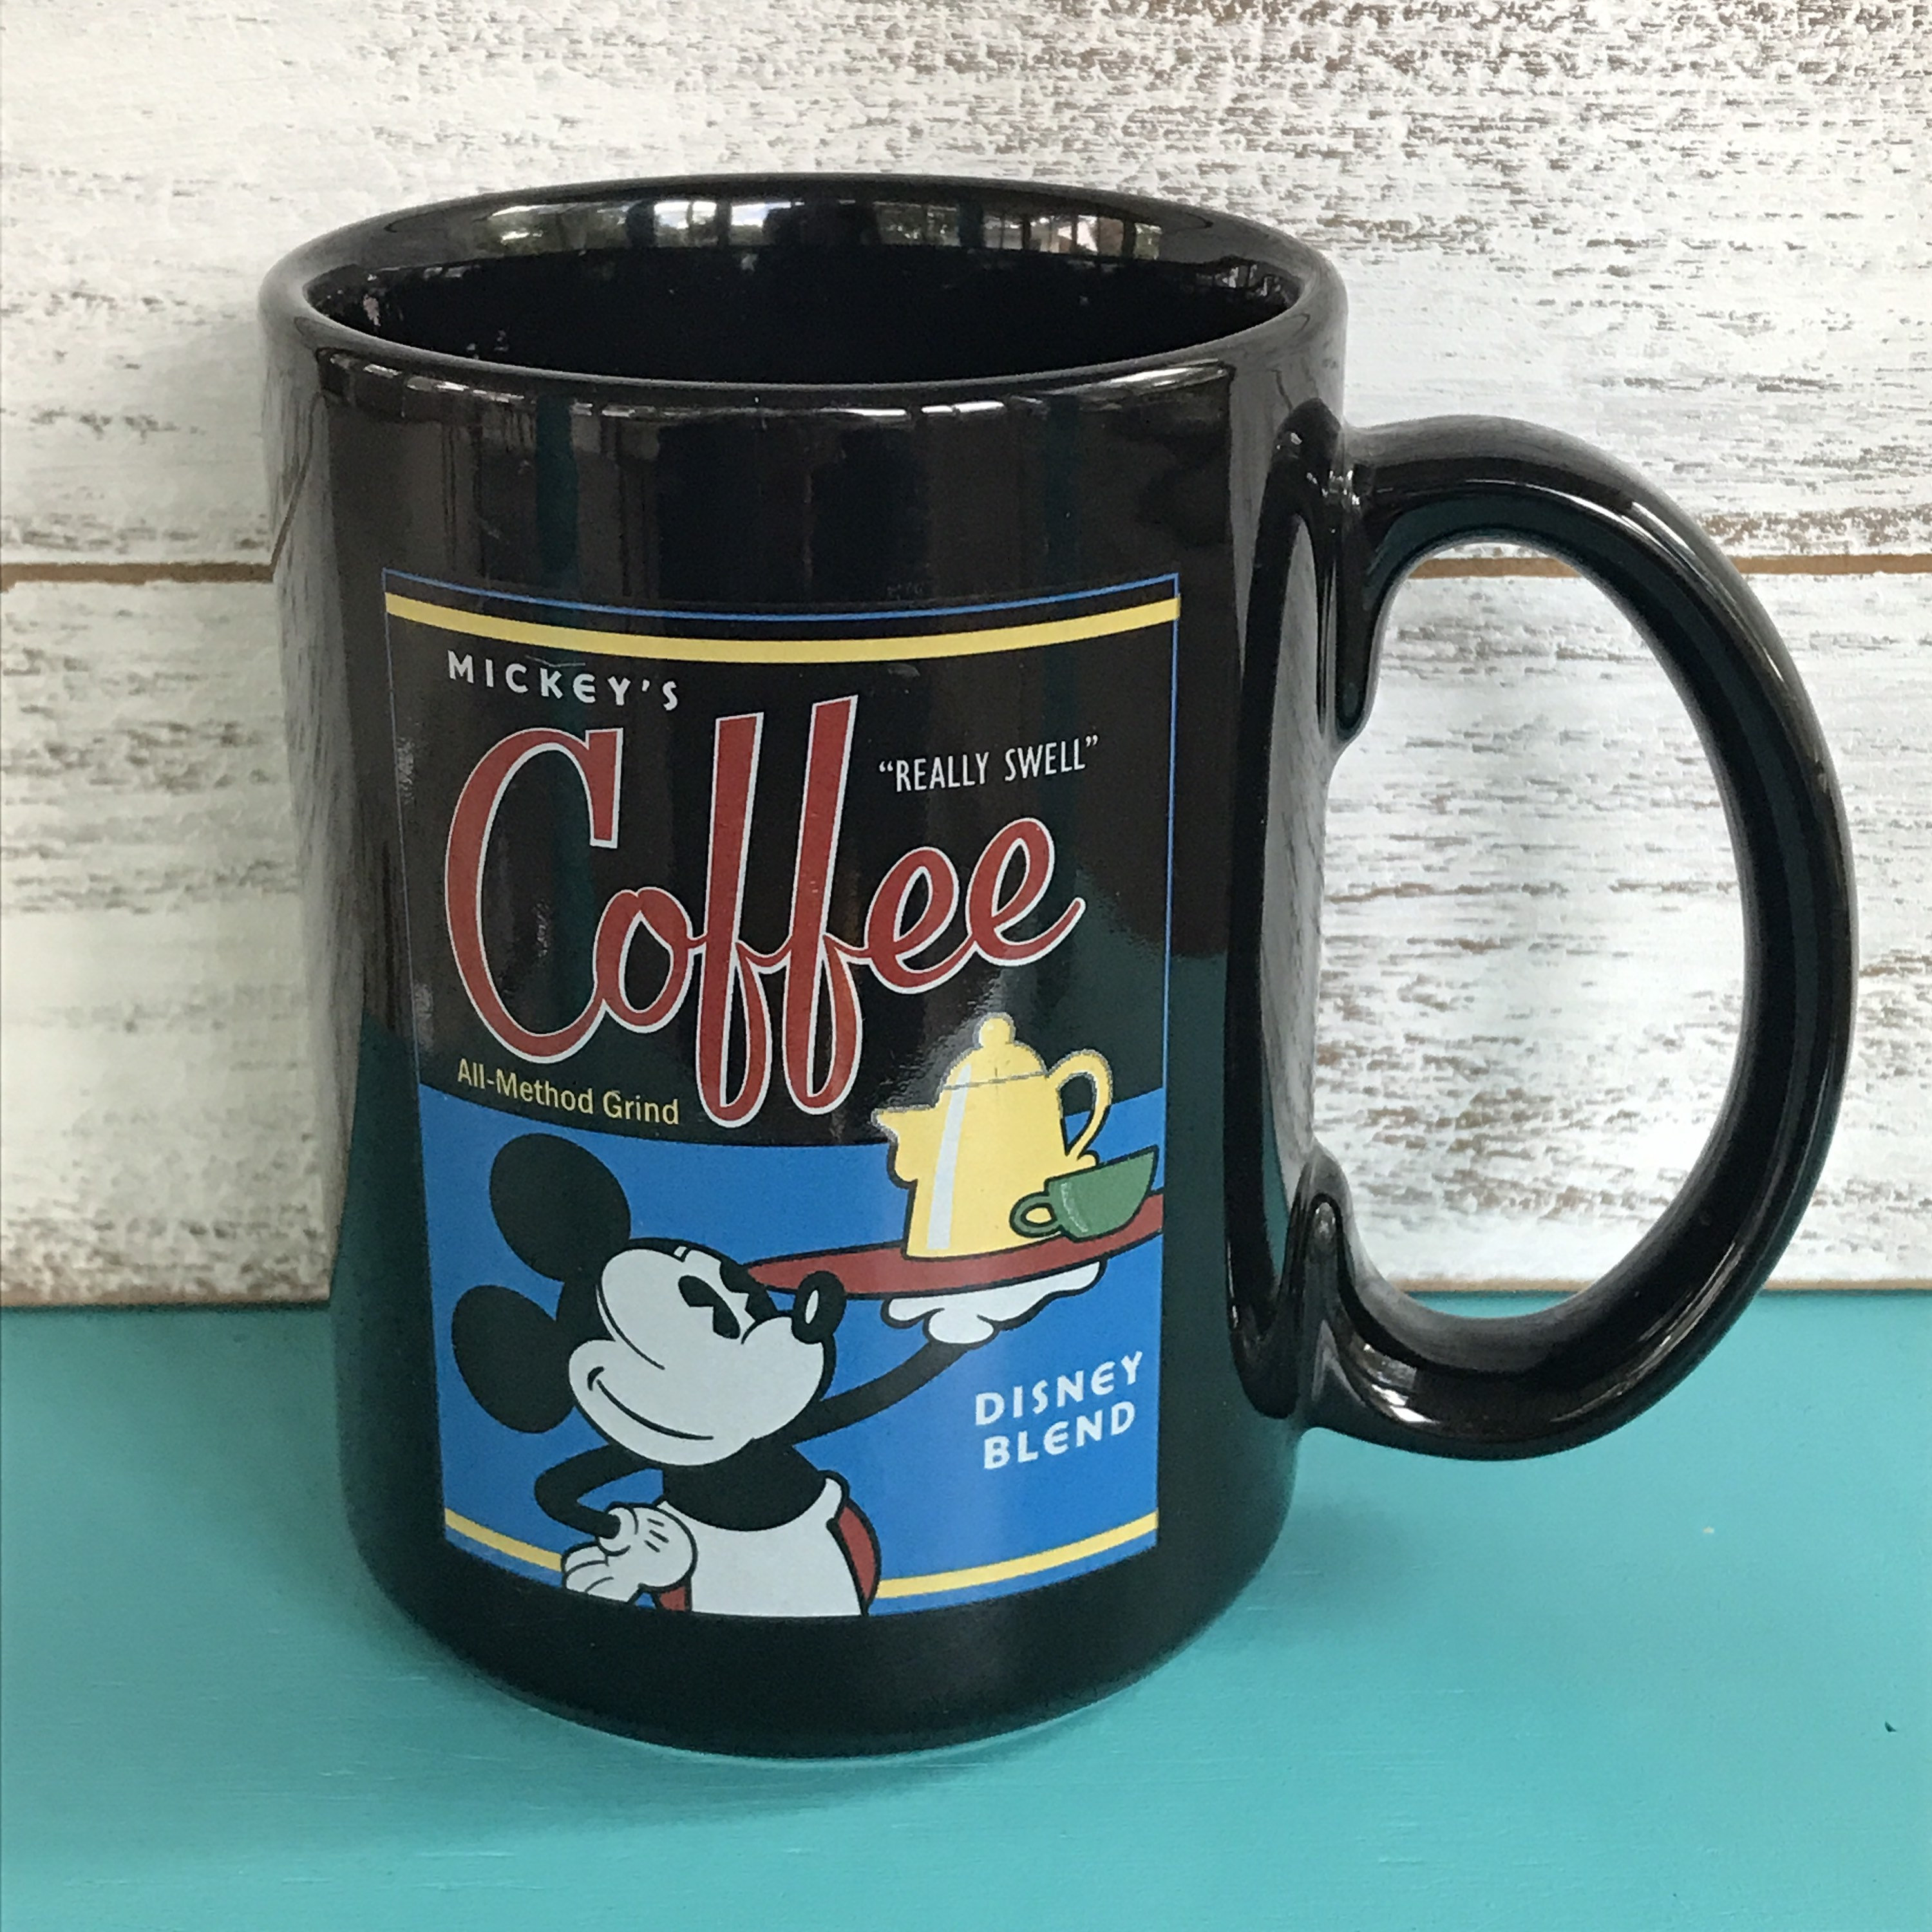 Disney Store Mickey Mouse Blue Large 16 oz Mug Coffee Cup Faces/Moods of  Mickey